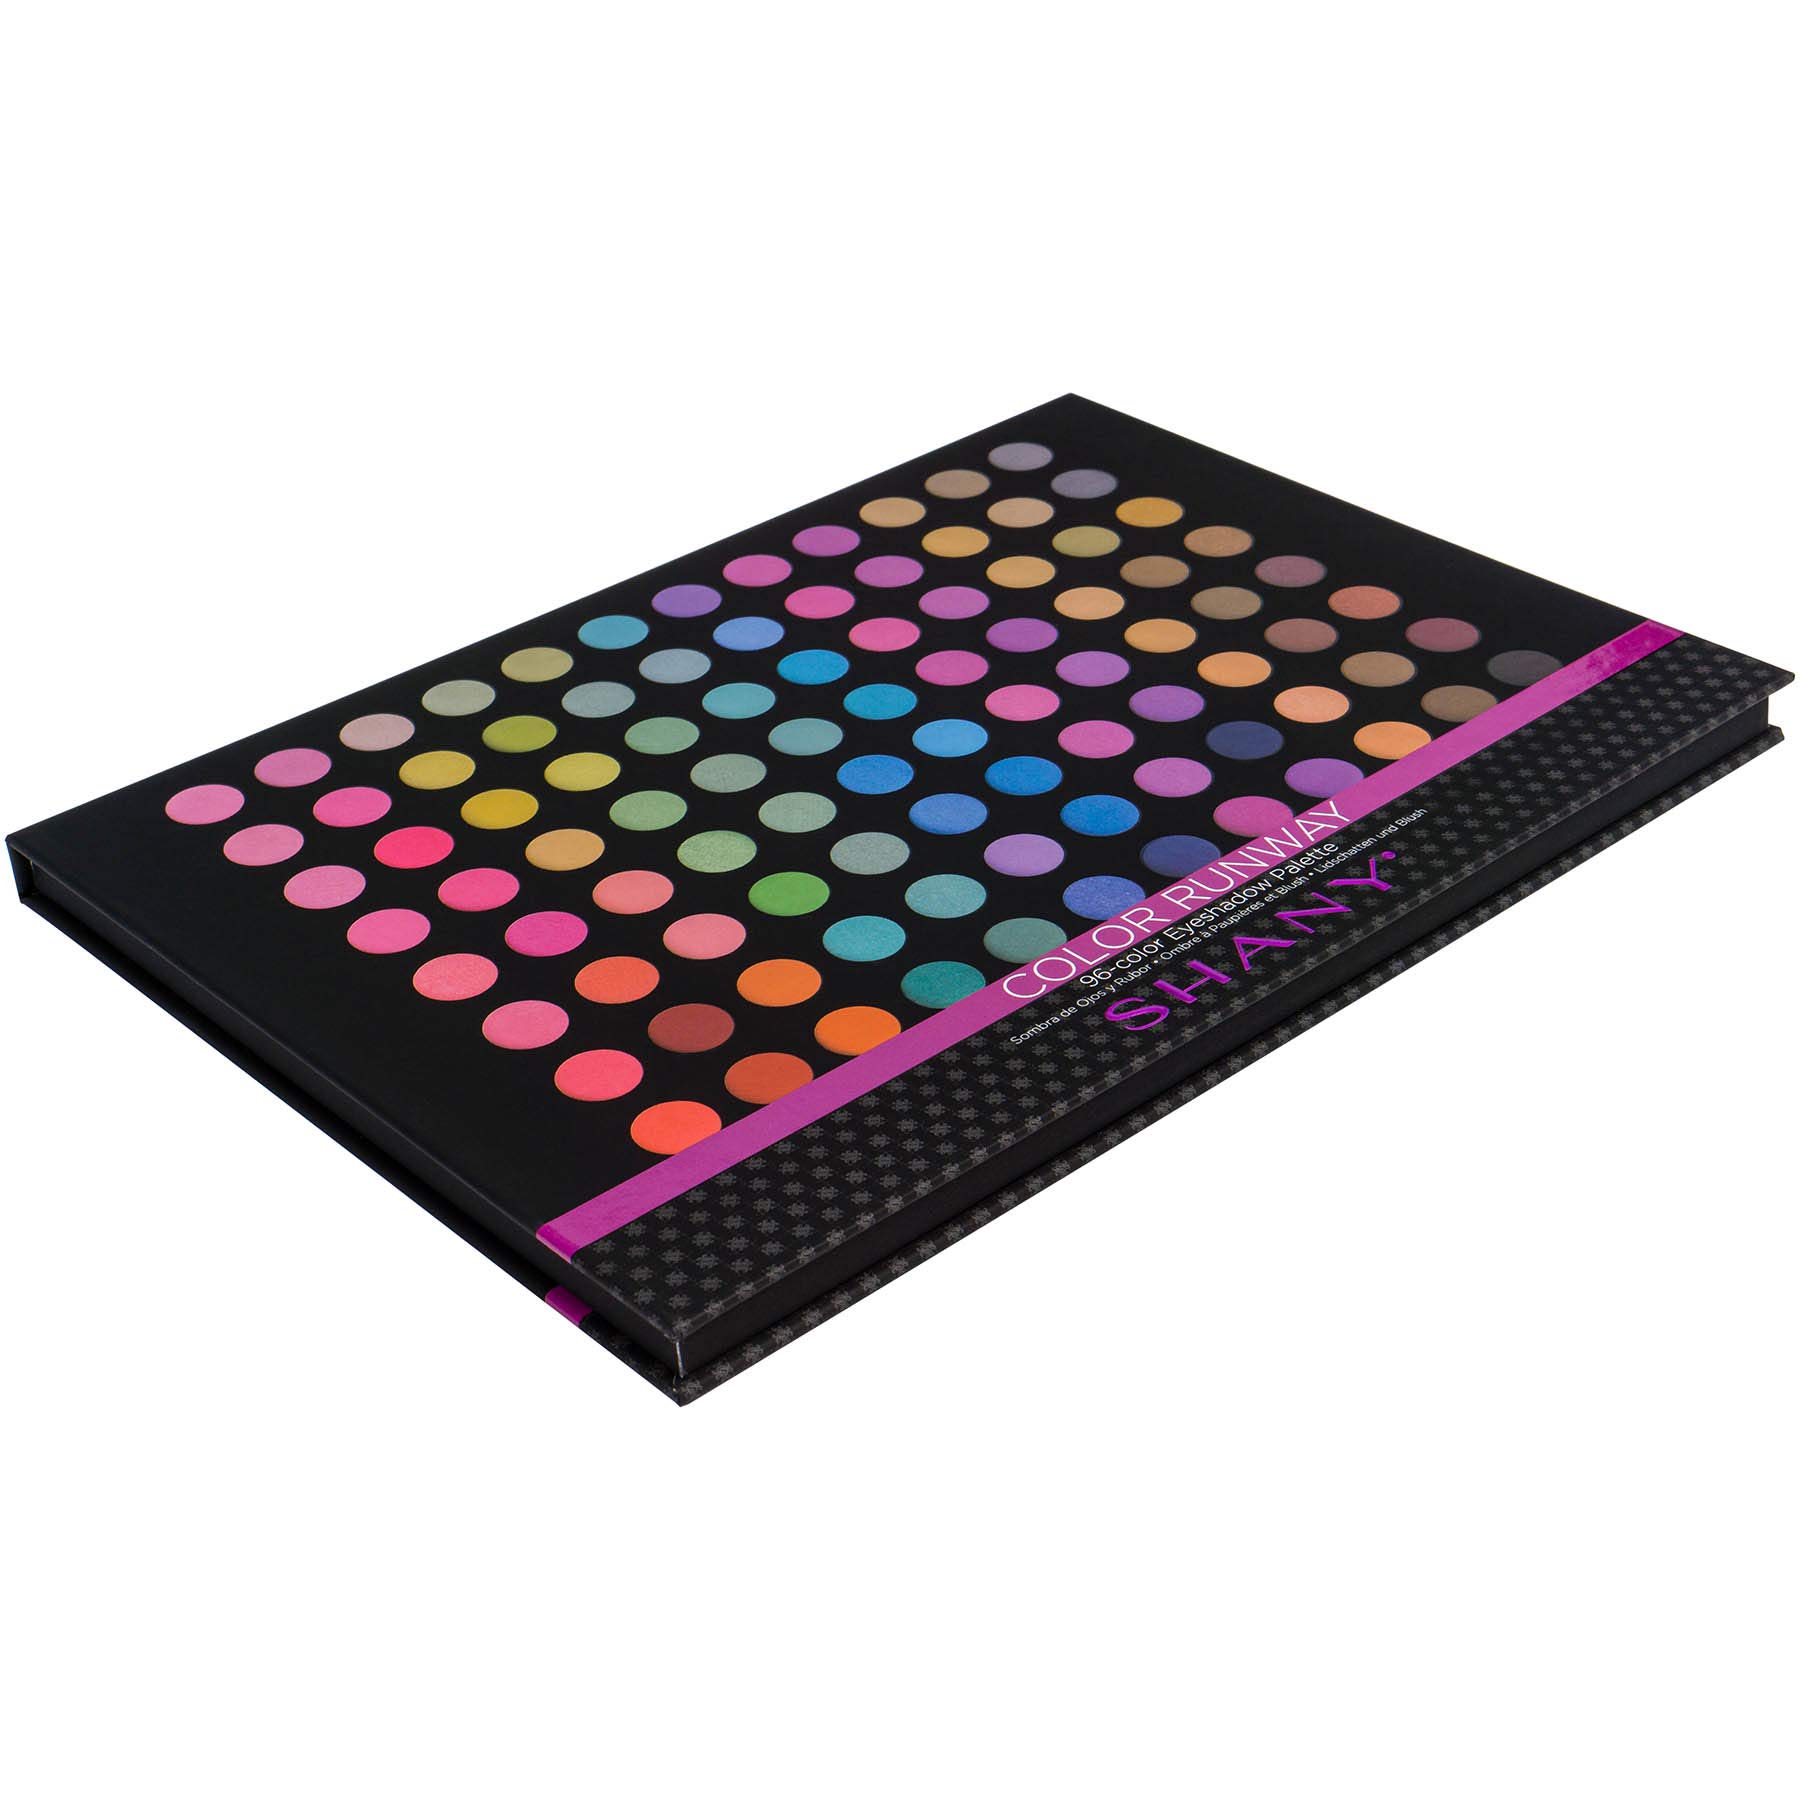 SHANY 96 Color Runway Matte Highly Pigmented Blendable Natural Colors Professional Makeup Eye shadow Palette